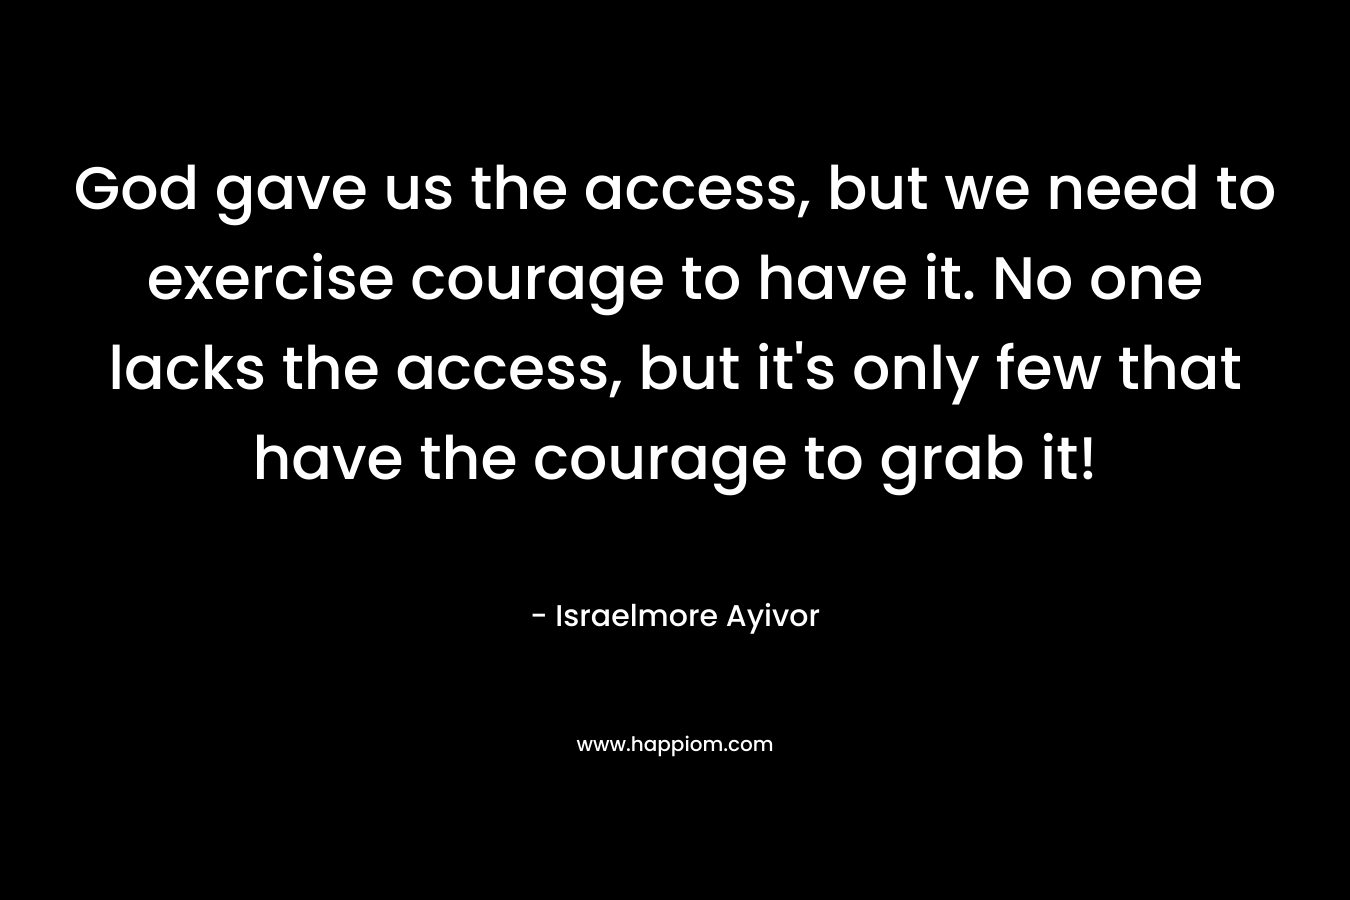 God gave us the access, but we need to exercise courage to have it. No one lacks the access, but it's only few that have the courage to grab it!